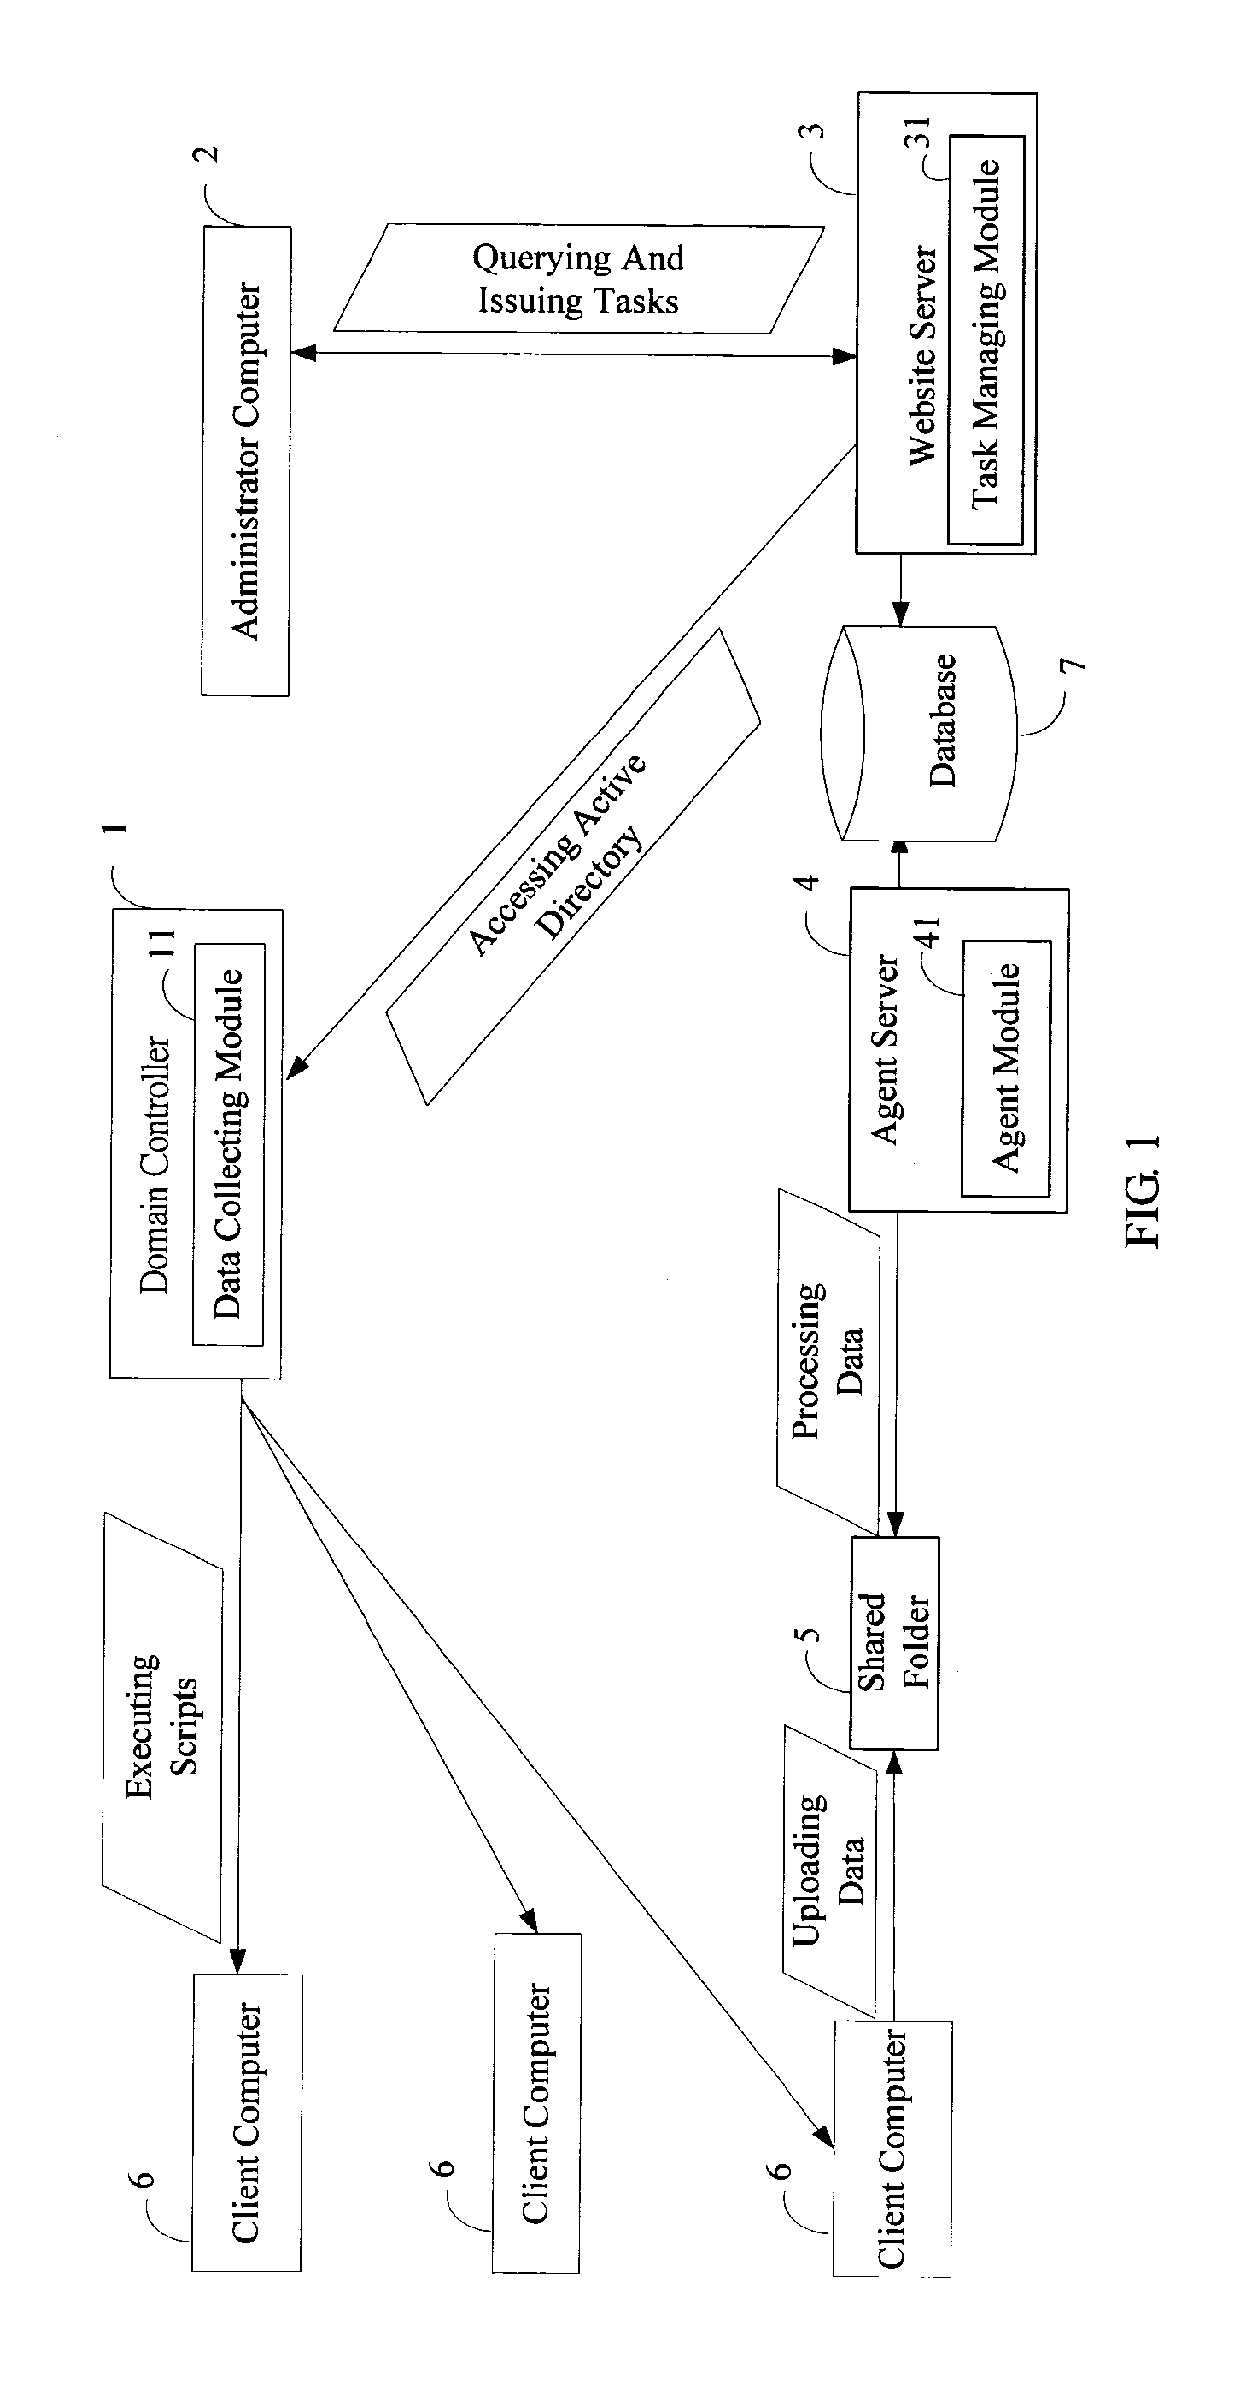 System and method for network resource management